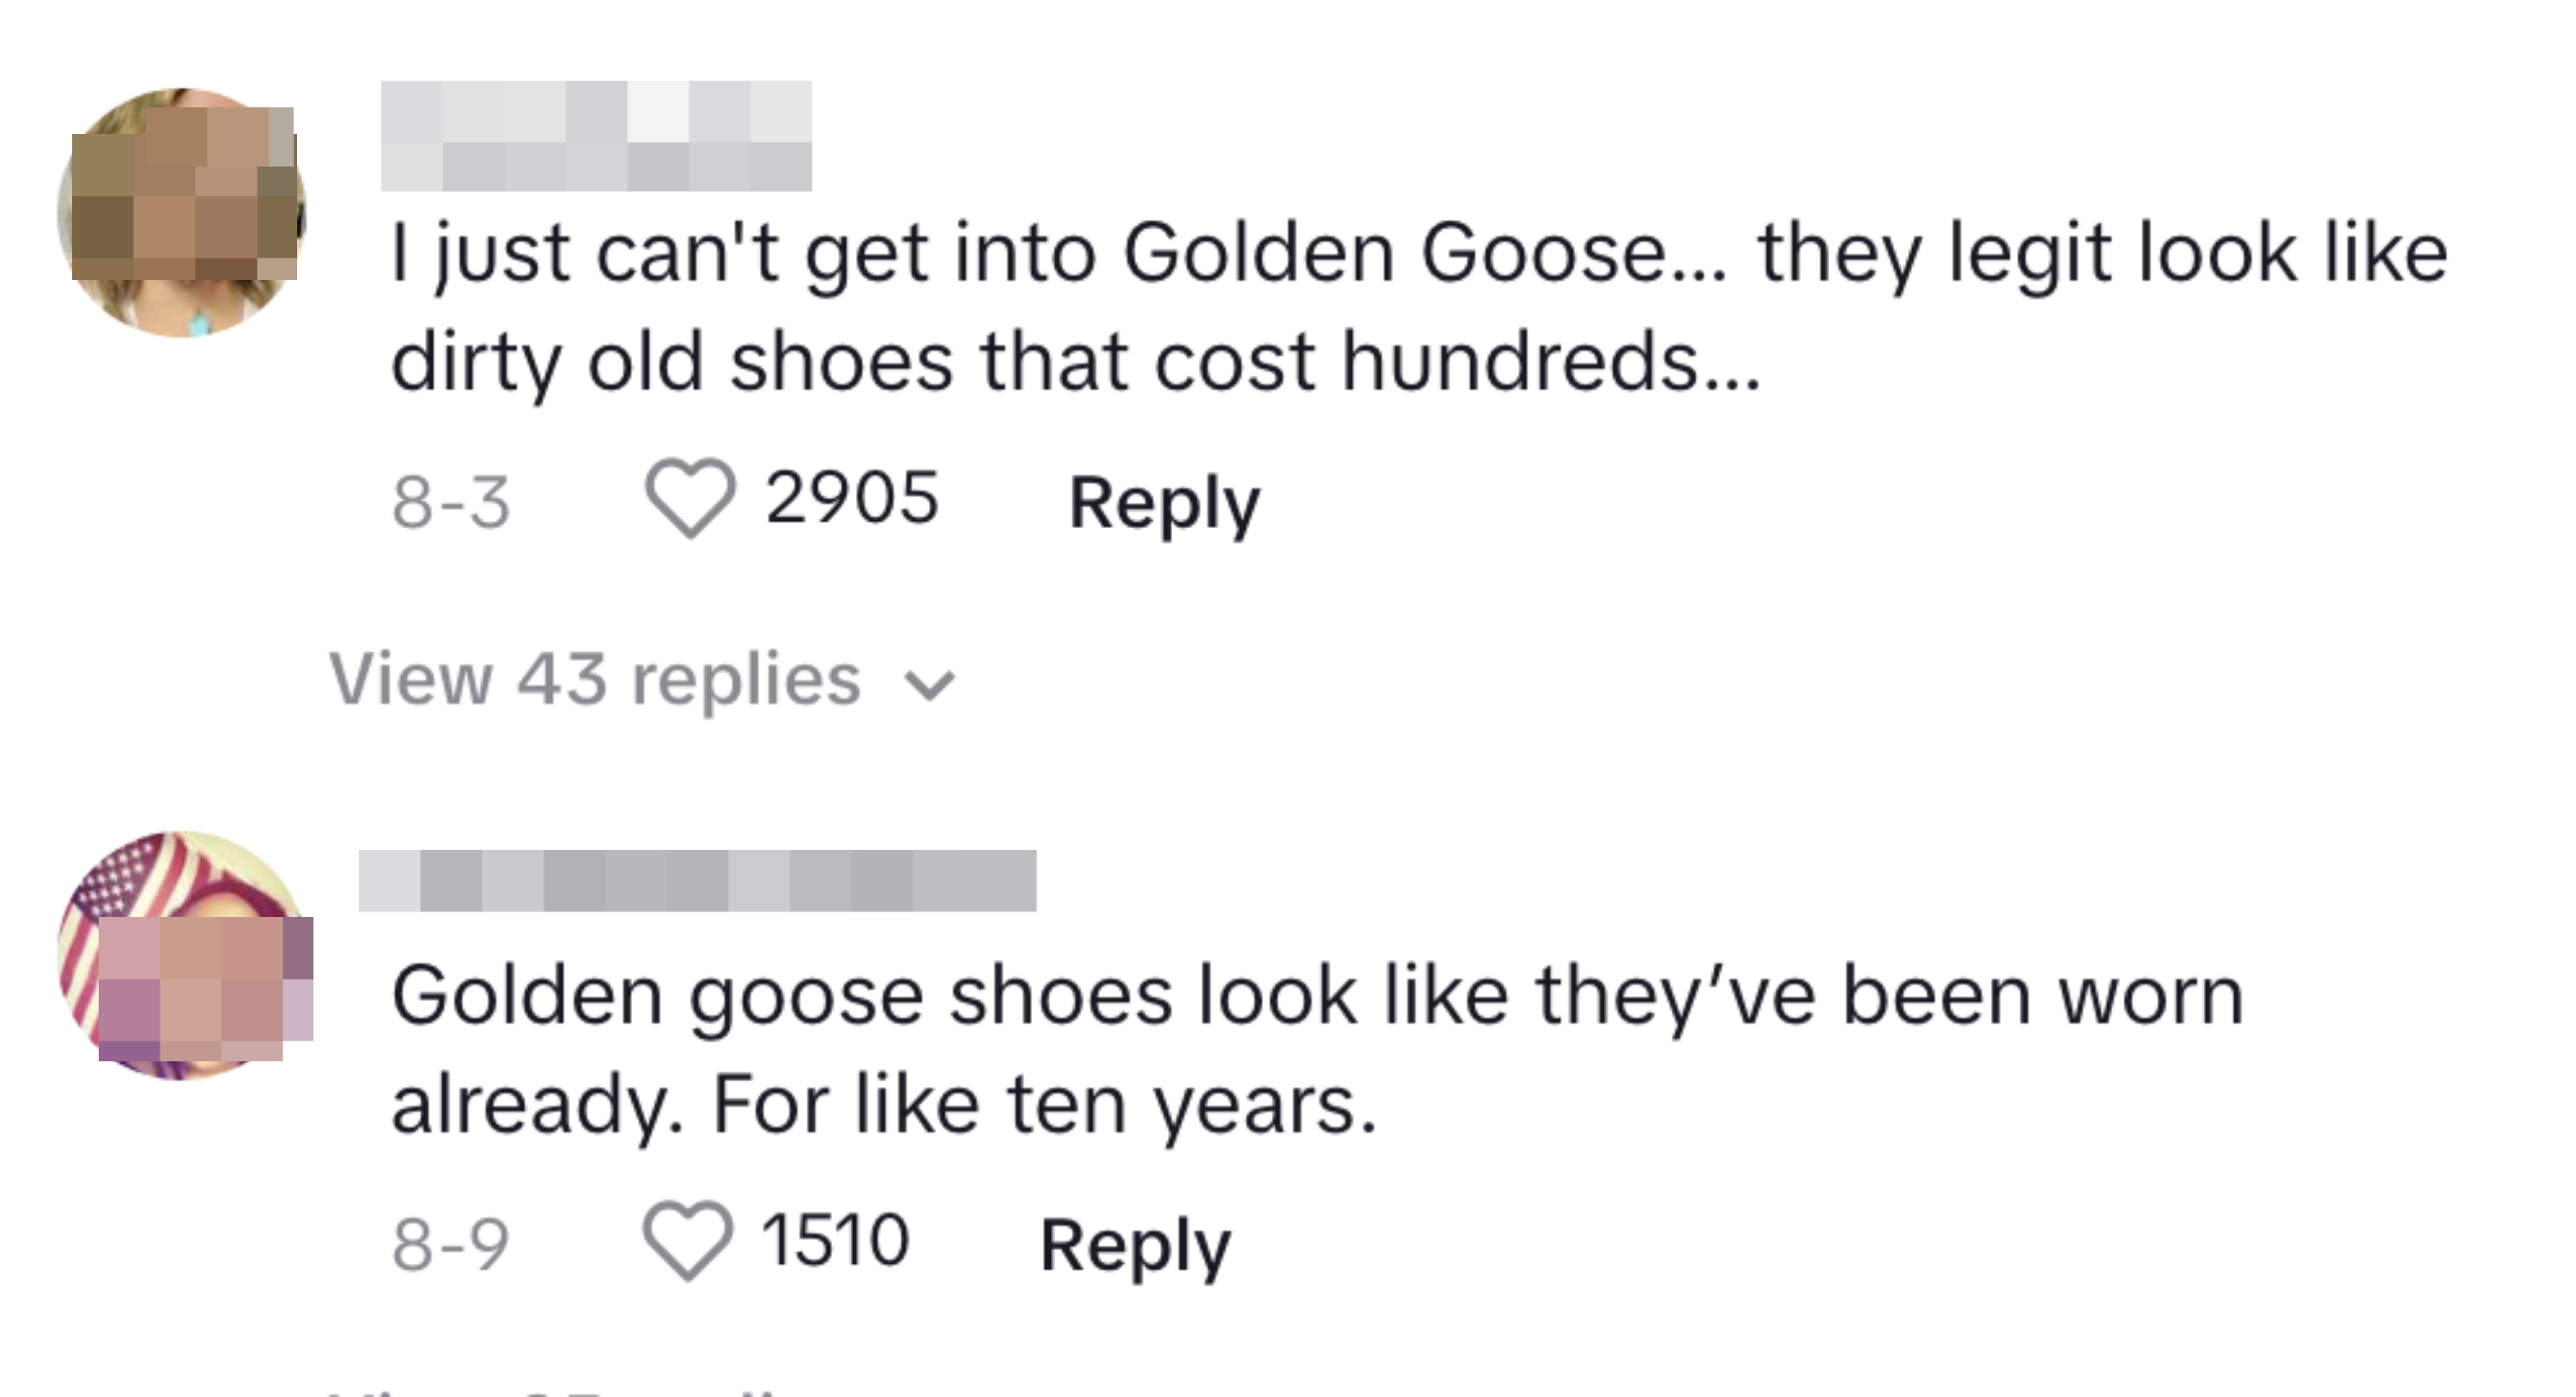 Commenters talking about Golden Goose sneakers and how they cost way too much money for coming &quot;pre-worn&quot;